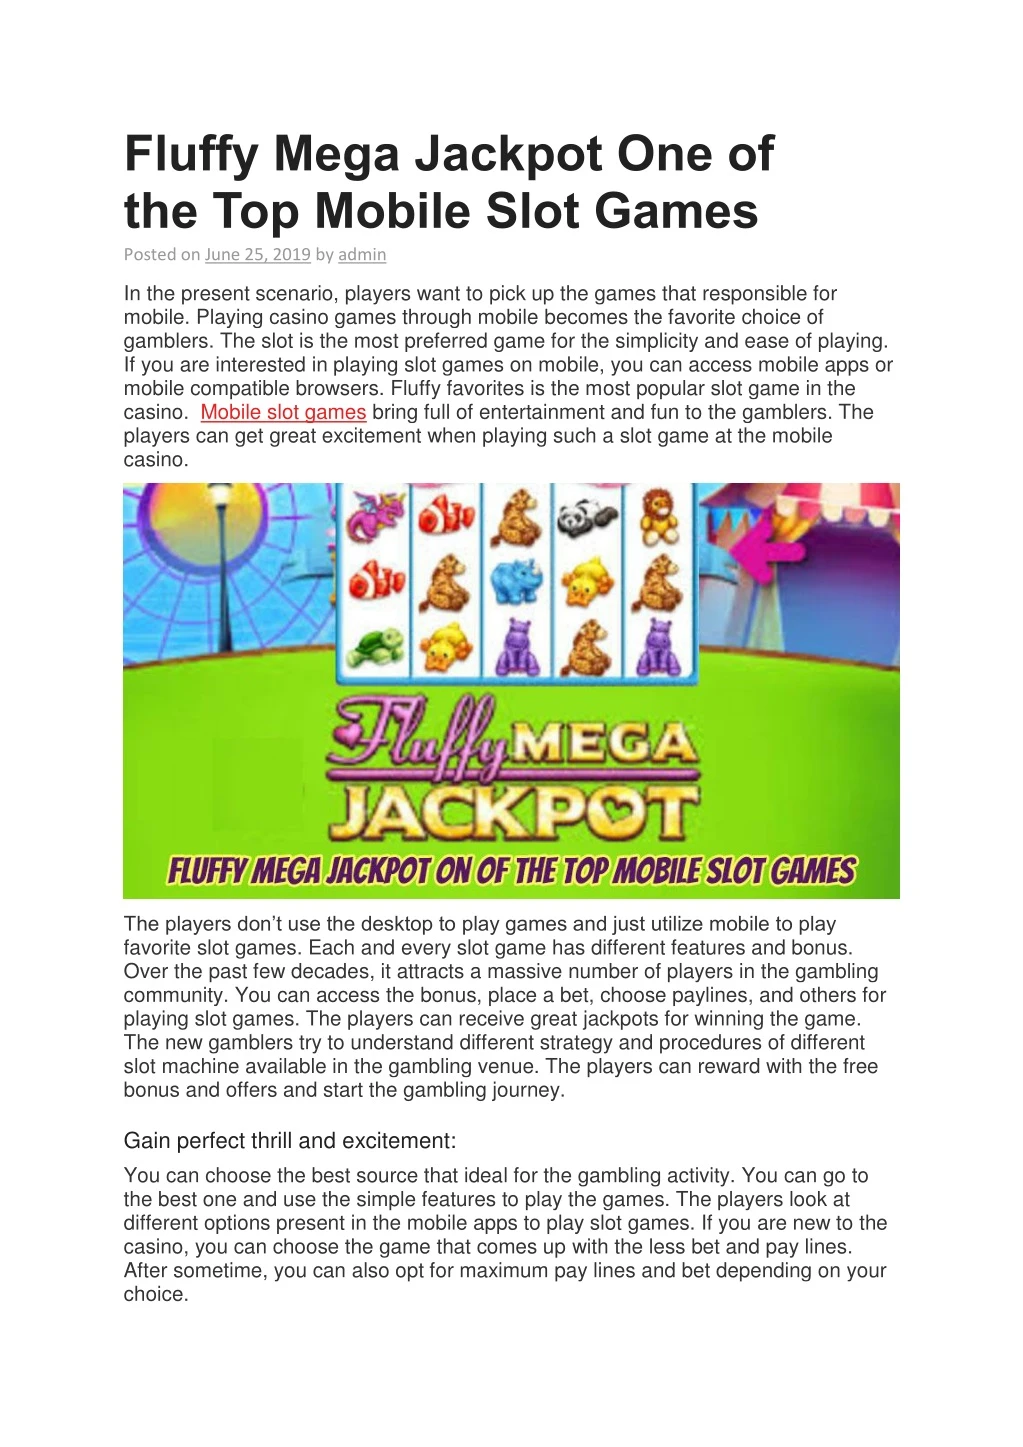 fluffy mega jackpot one of the top mobile slot